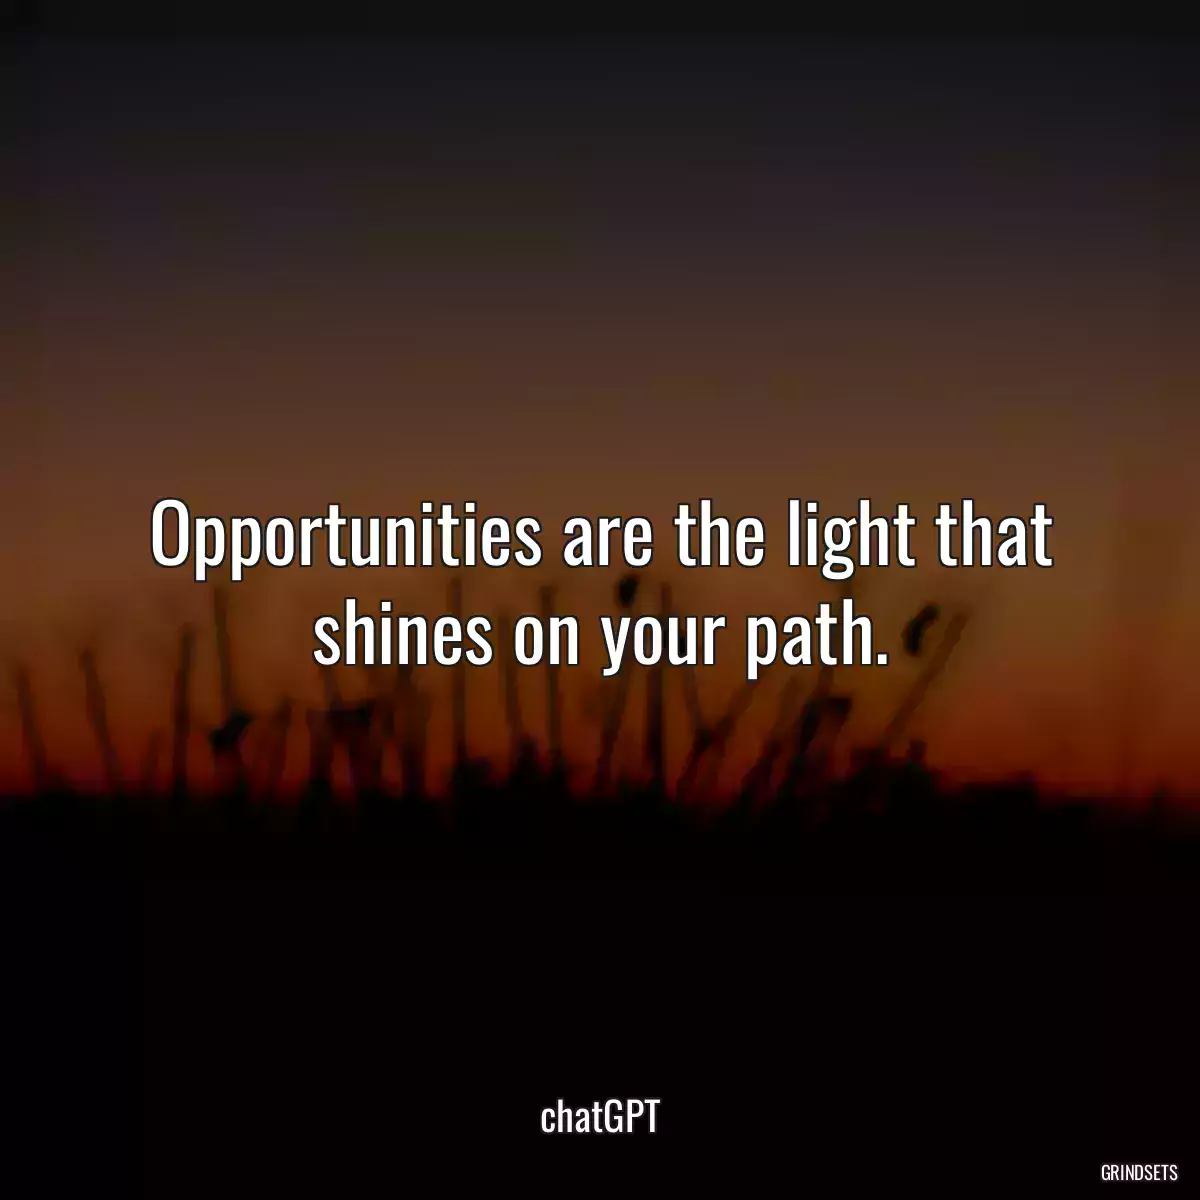 Opportunities are the light that shines on your path.